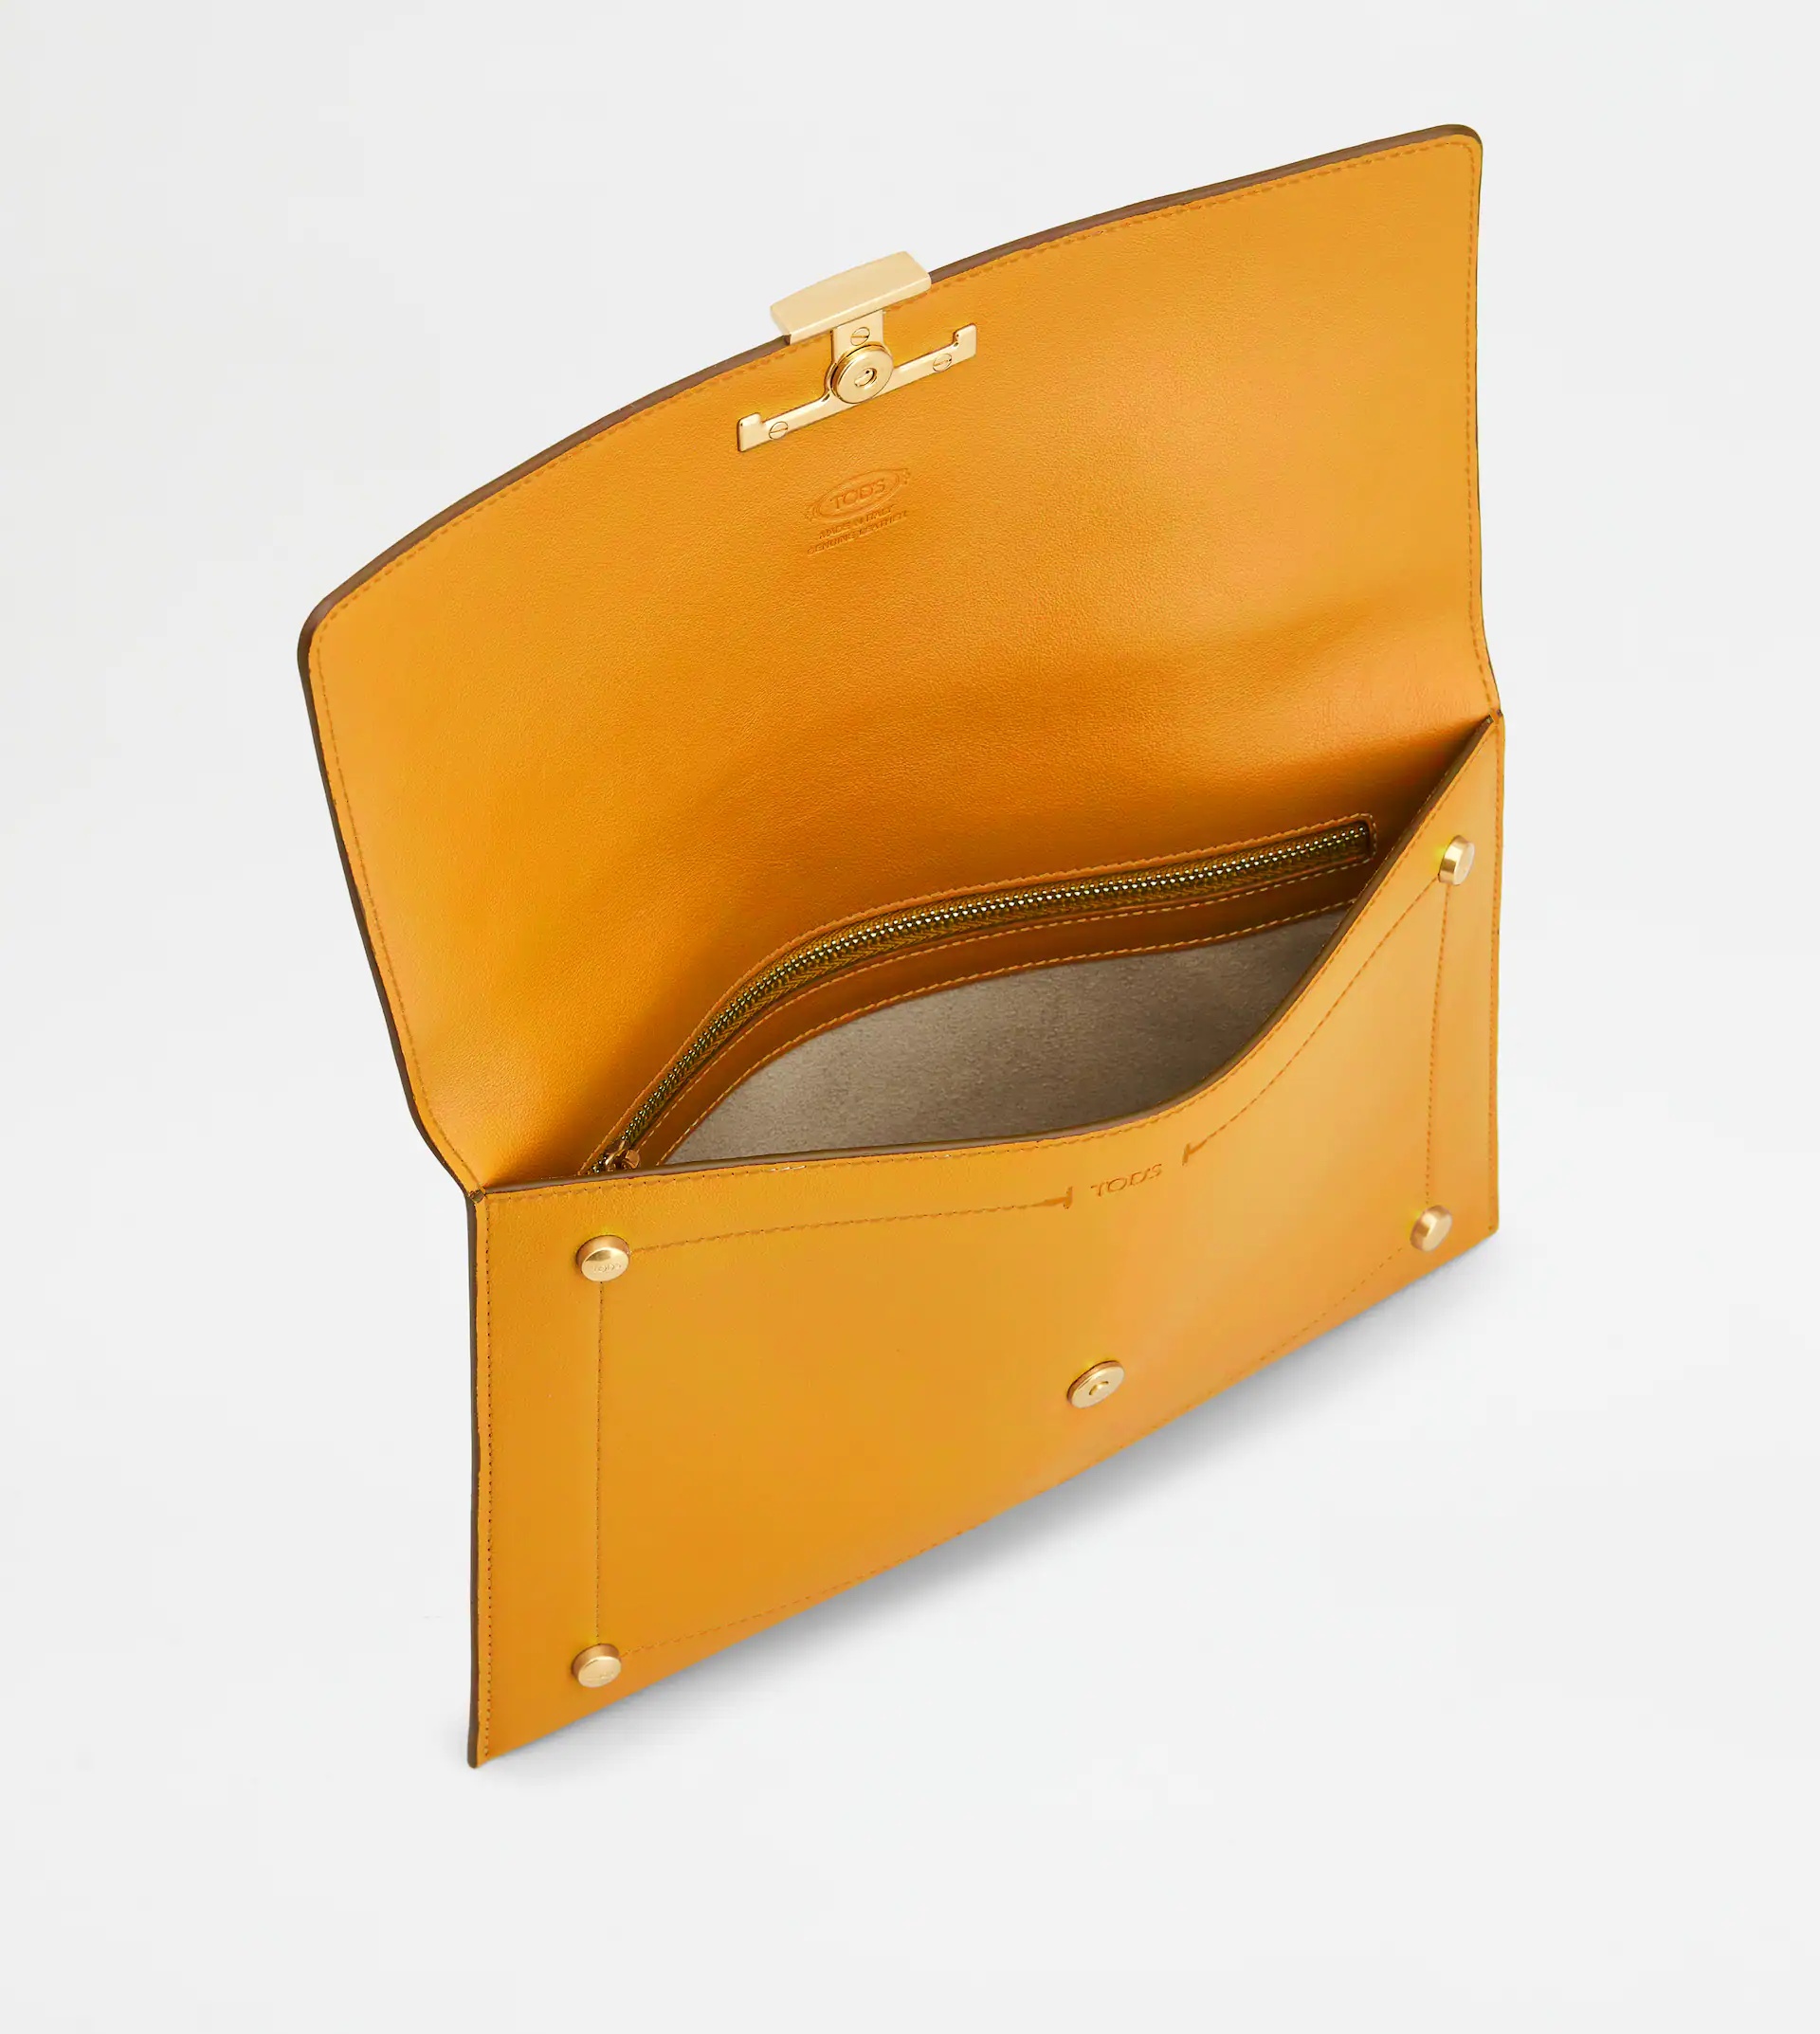 T TIMELESS ENVELOPE CLUTCH IN LEATHER LARGE - ORANGE - 2